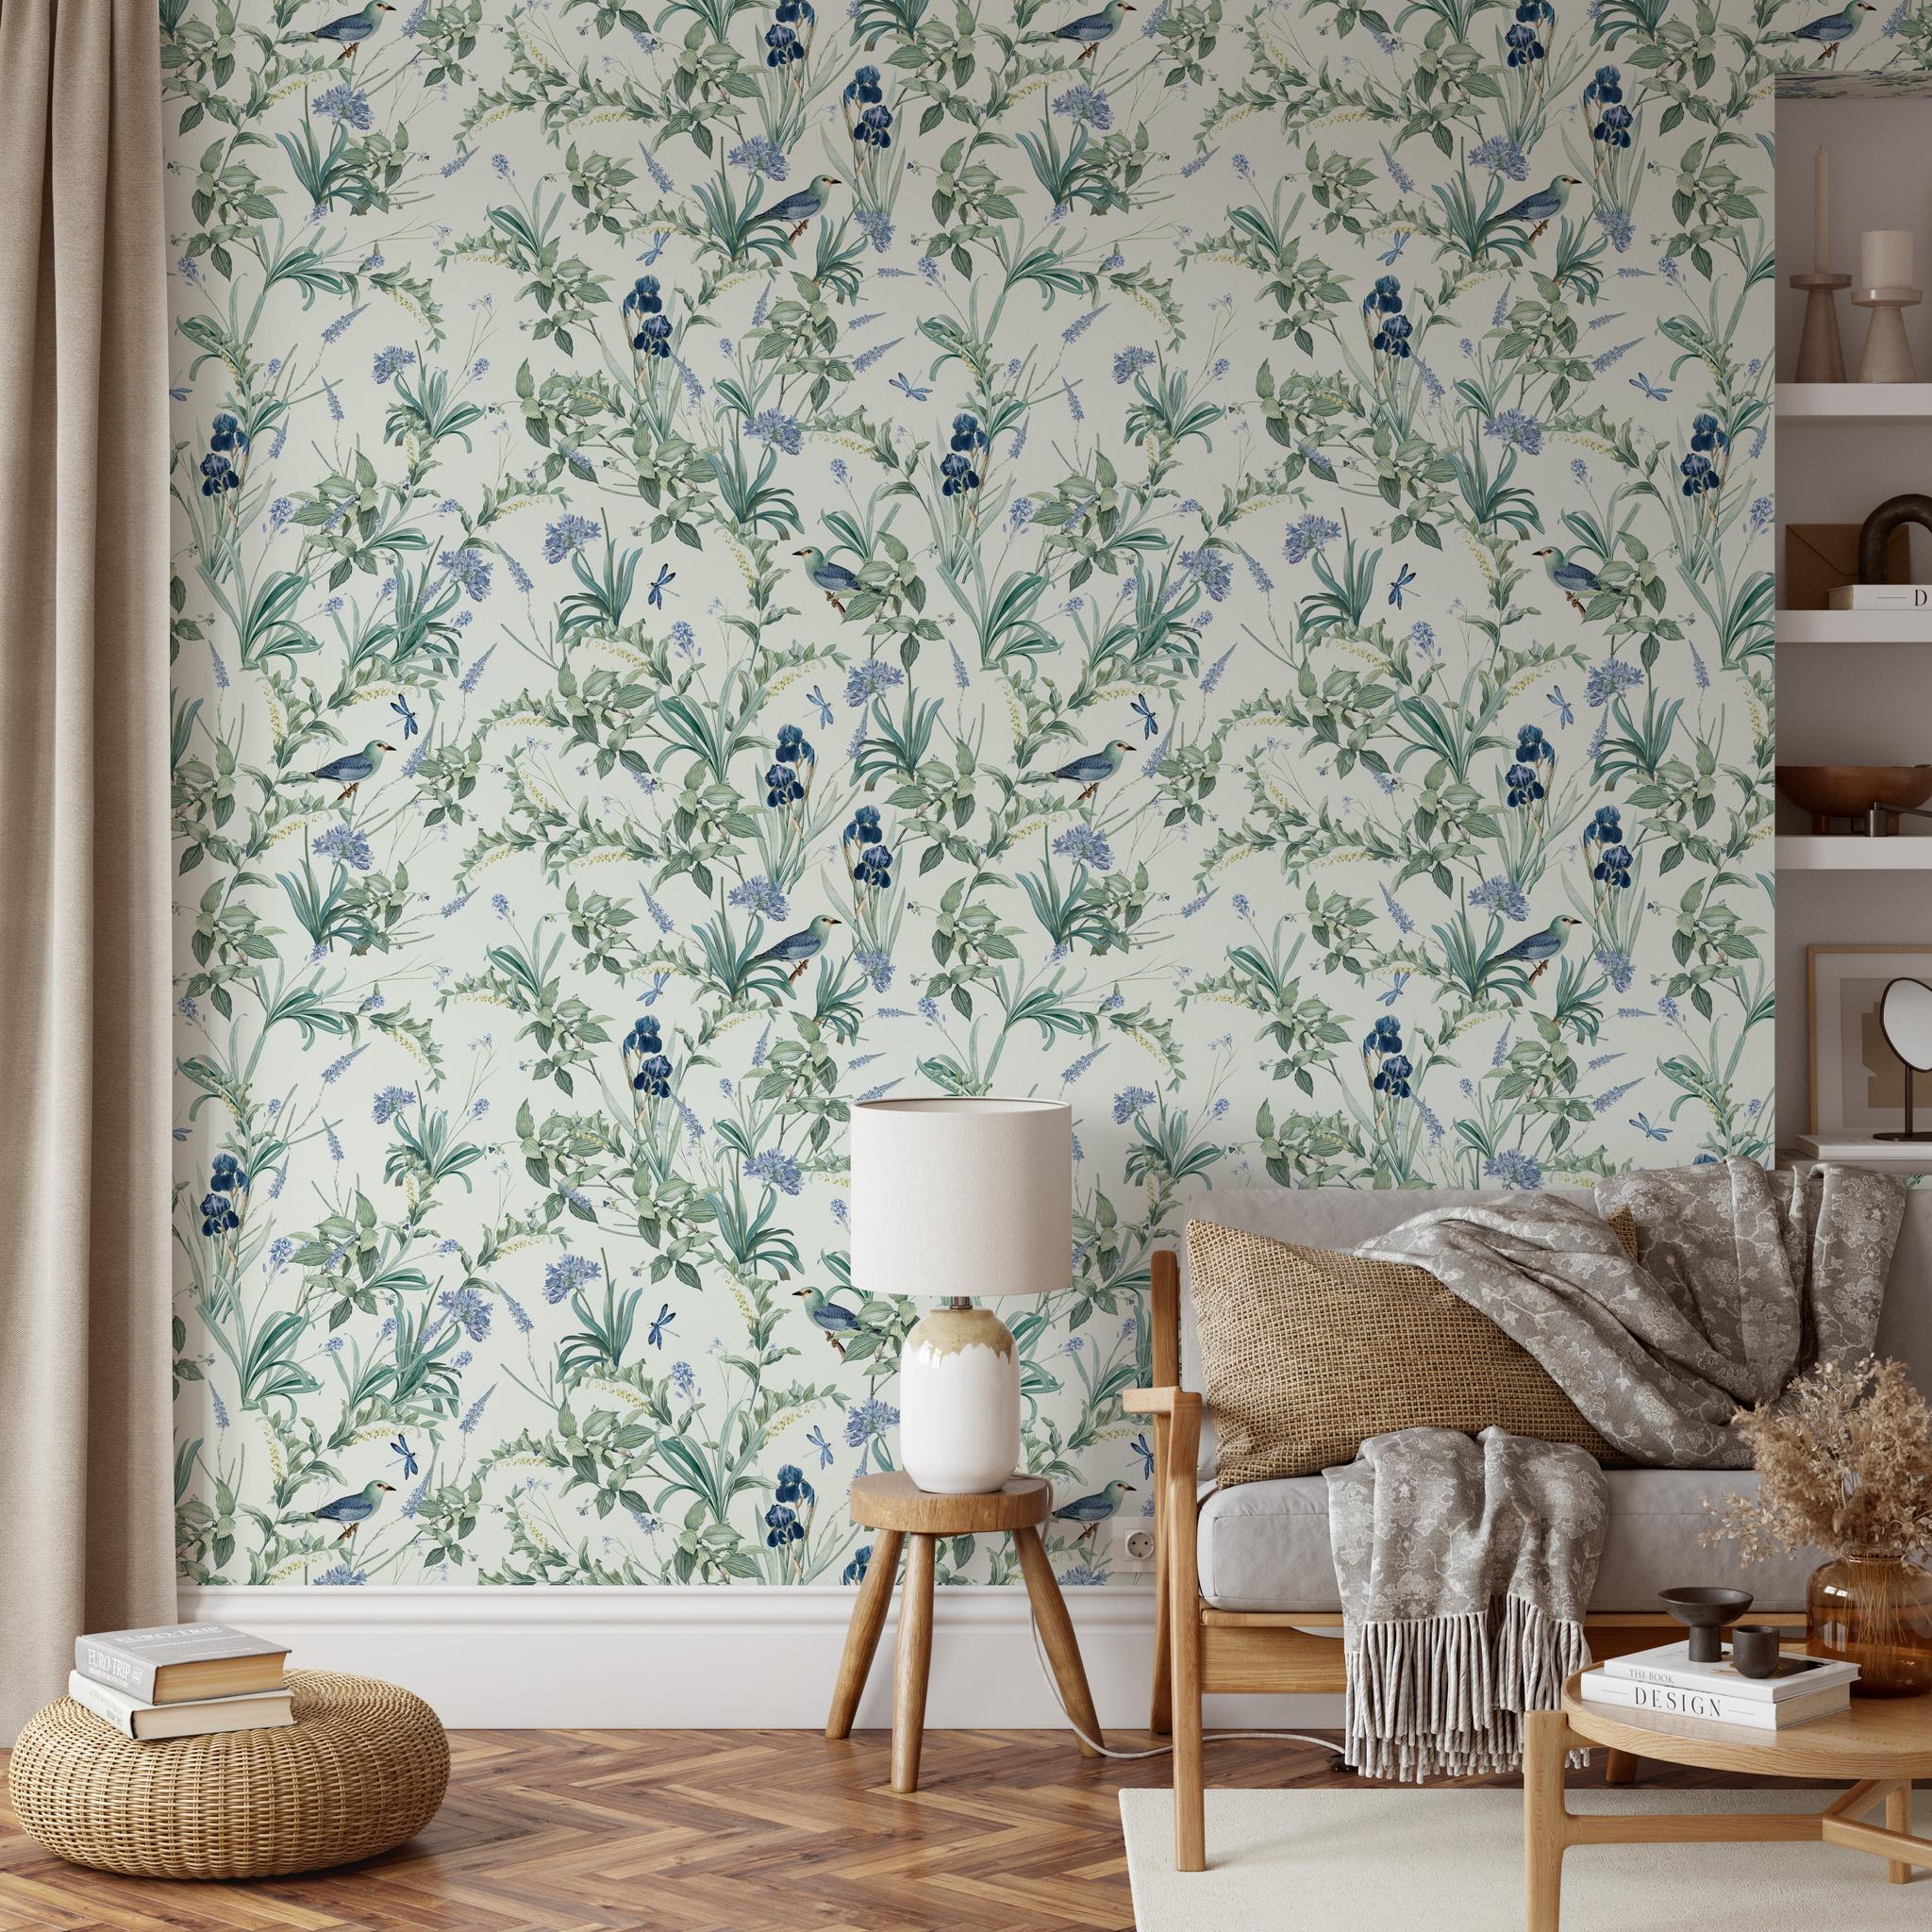 "Wall Blush's 'Fly Away with Me Wallpaper' accentuating modern living room decor with elegant botanical design."